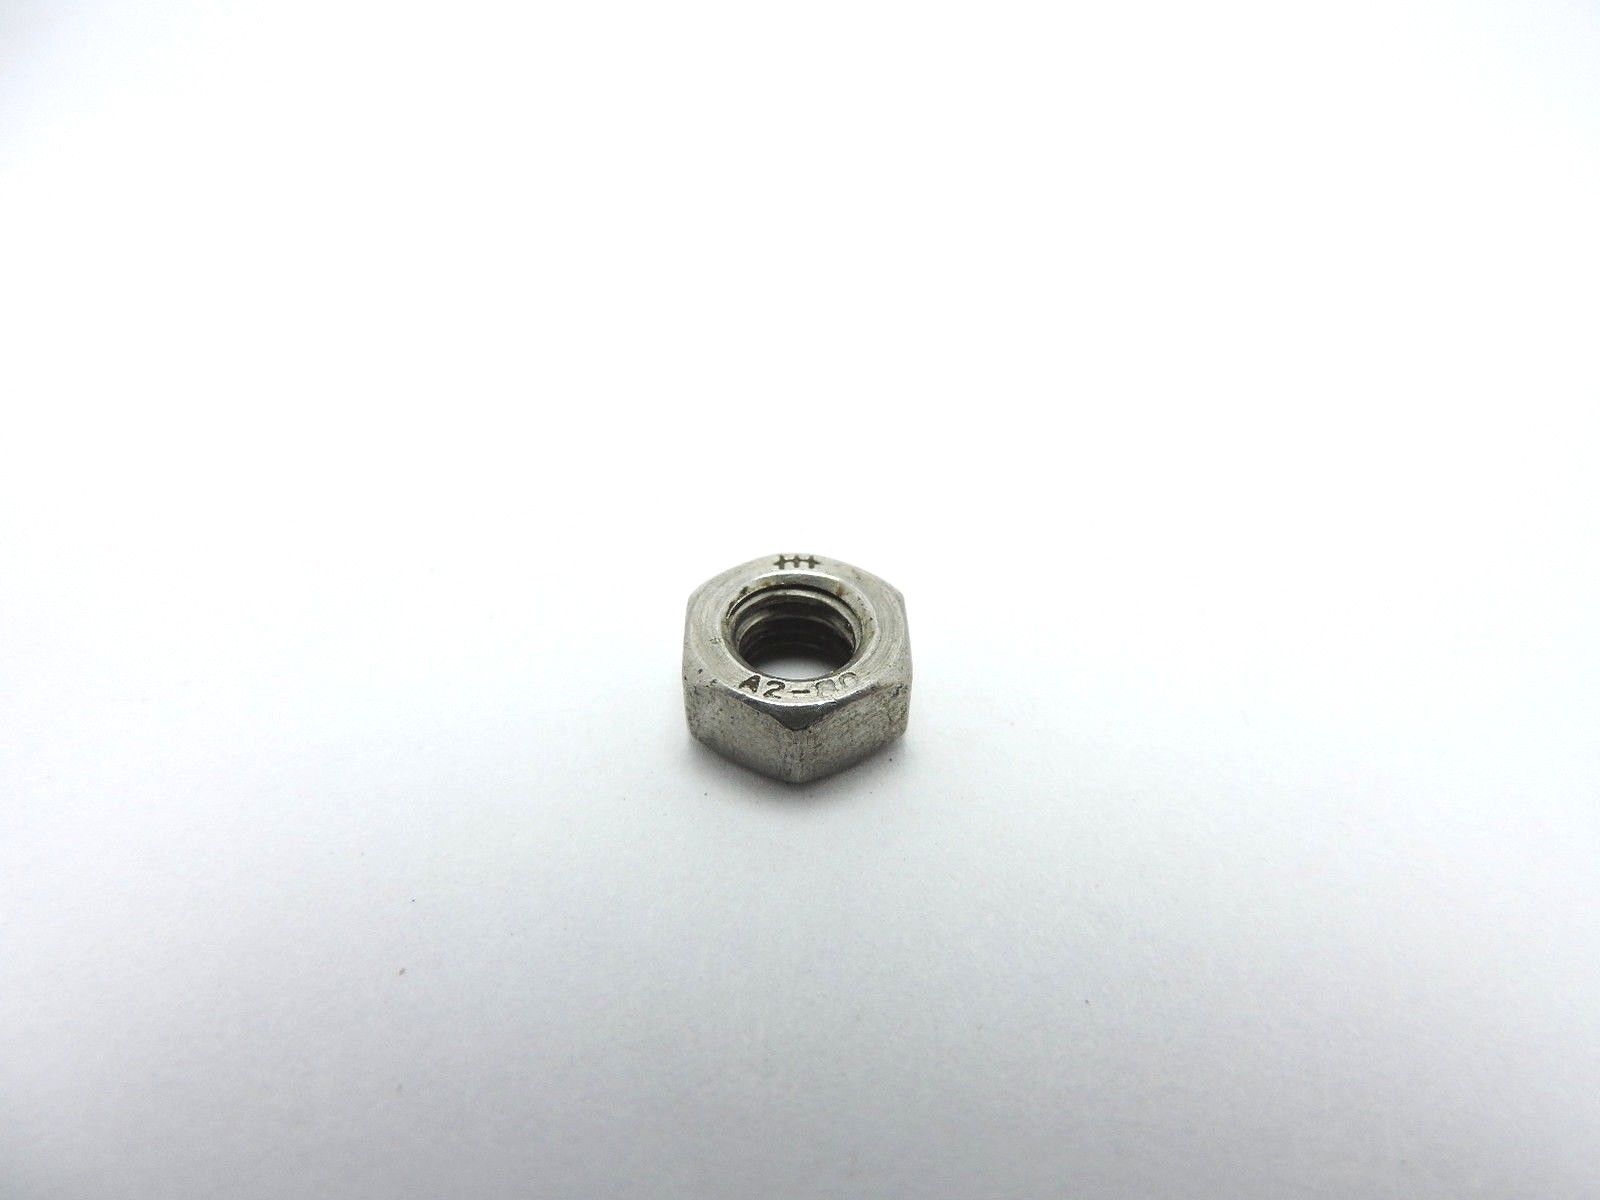 Truing Stone Spindle Nut - Right Hand Thread - Berkel OEM Part # M-0611 - Available from City Food Equipment